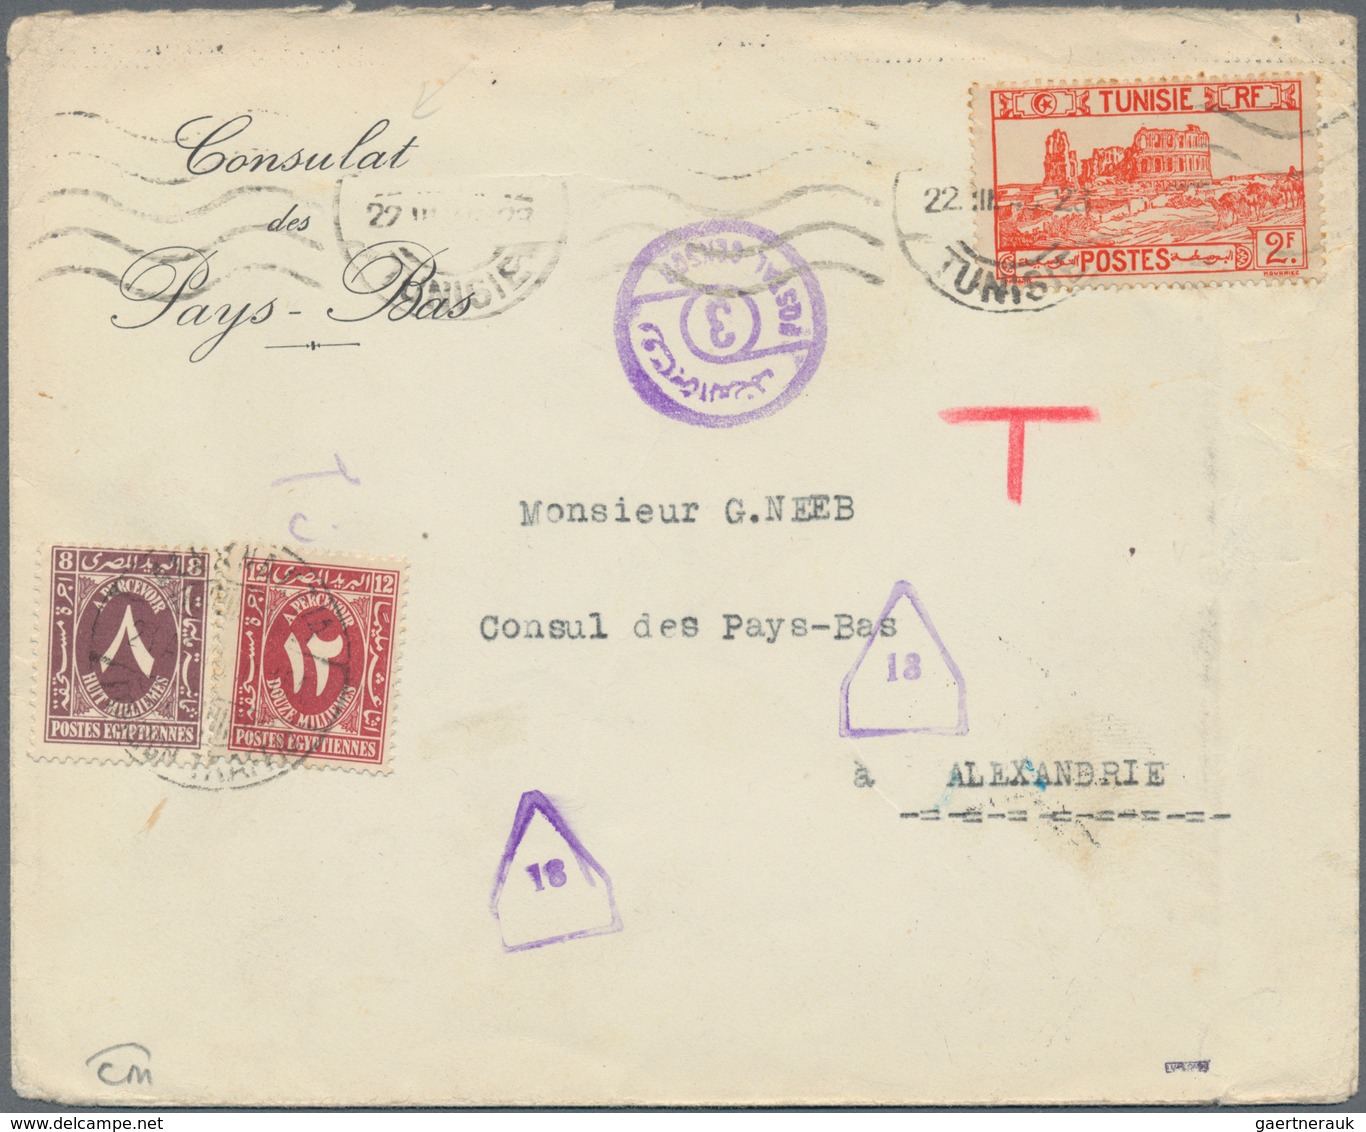 Ägypten - Portomarken: 1894 from ca., comprehensive collection with ca.40 covers, cards and statione